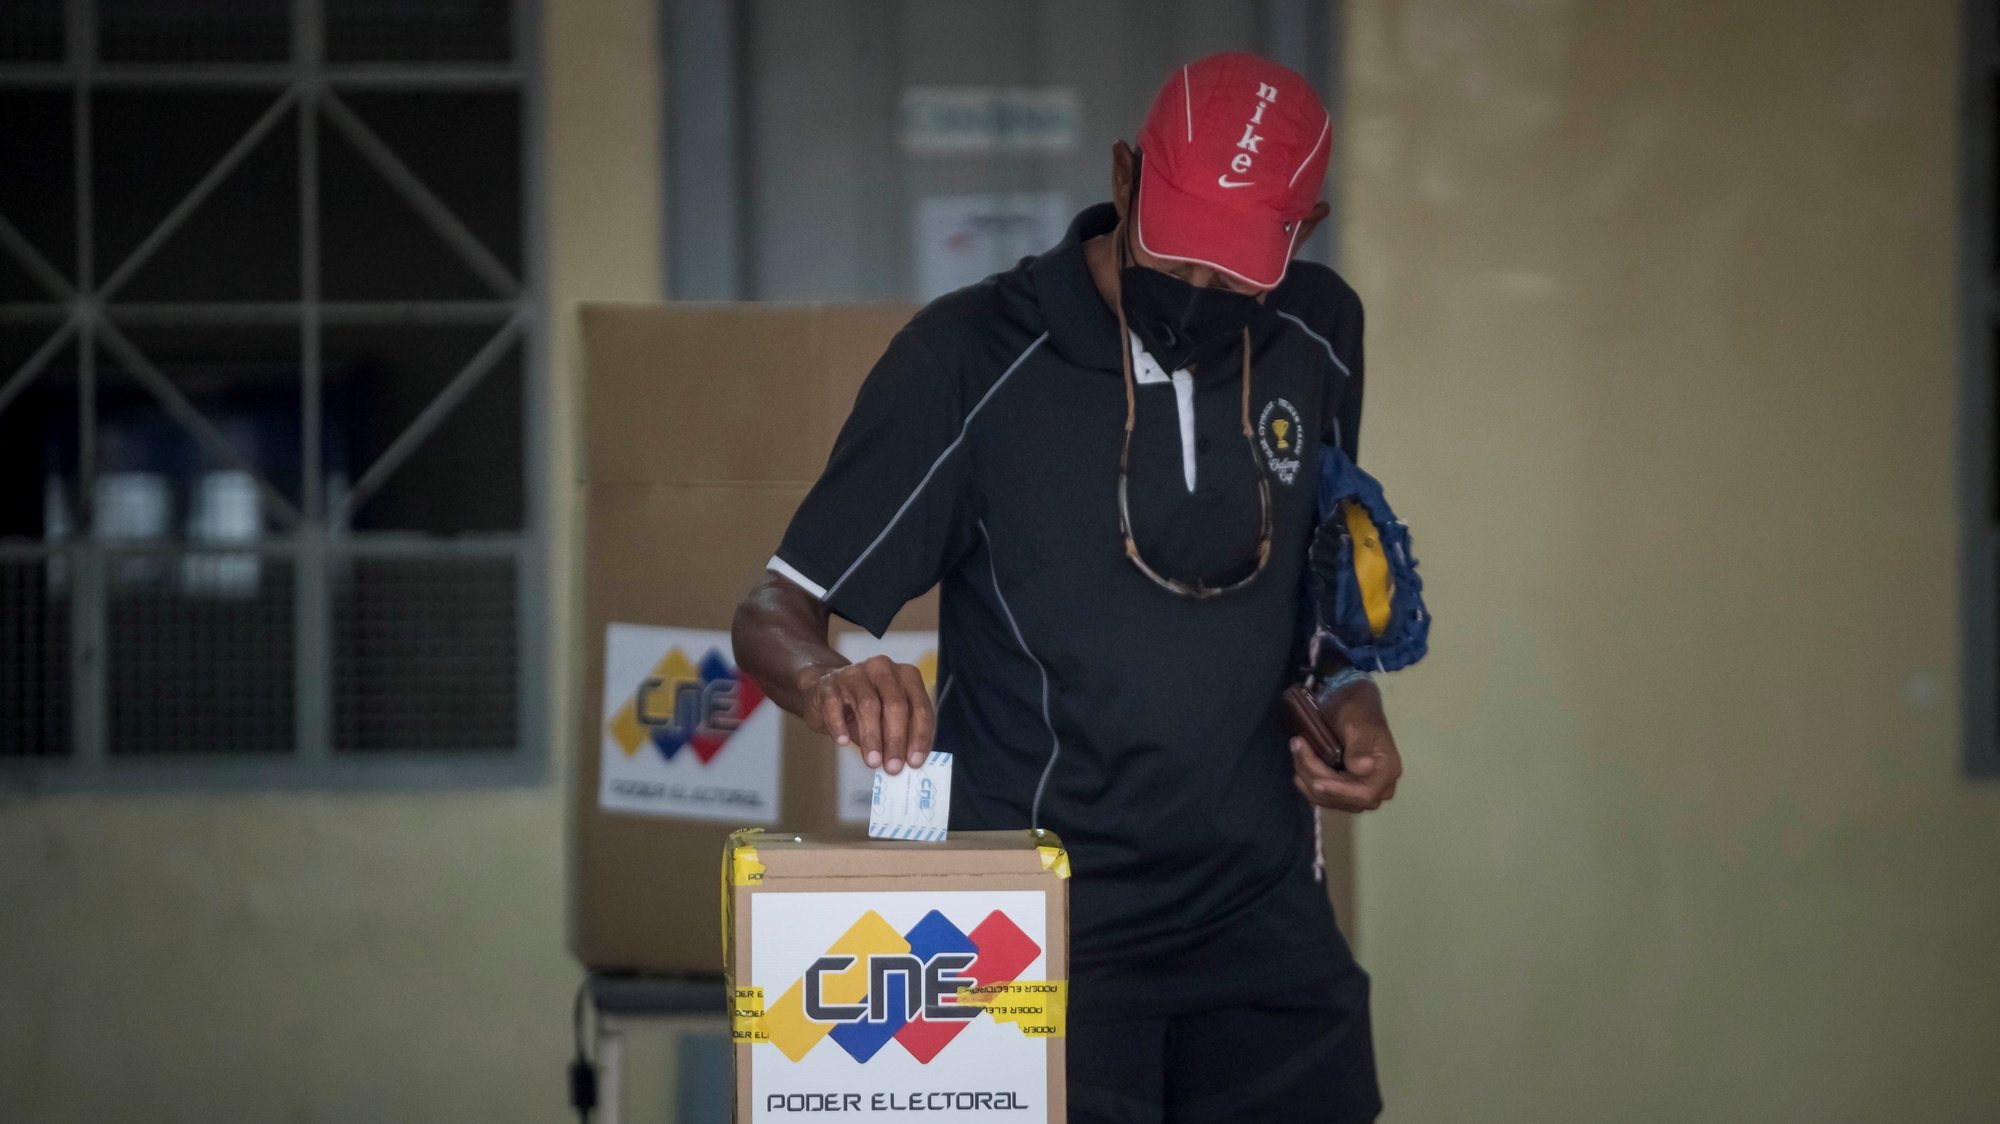 epa08867315 A voter casts his vote in a ballot box in a polling station during Parliamentary elections, in Caracas, Venezuela, 06 December 2020. Venezuelans were called to polls to select 277 members of the National Assembly. The opposition has called for a boycott of the elections, on grounds that the contest will not be free and fair.  EPA/Miguel Gutierrez